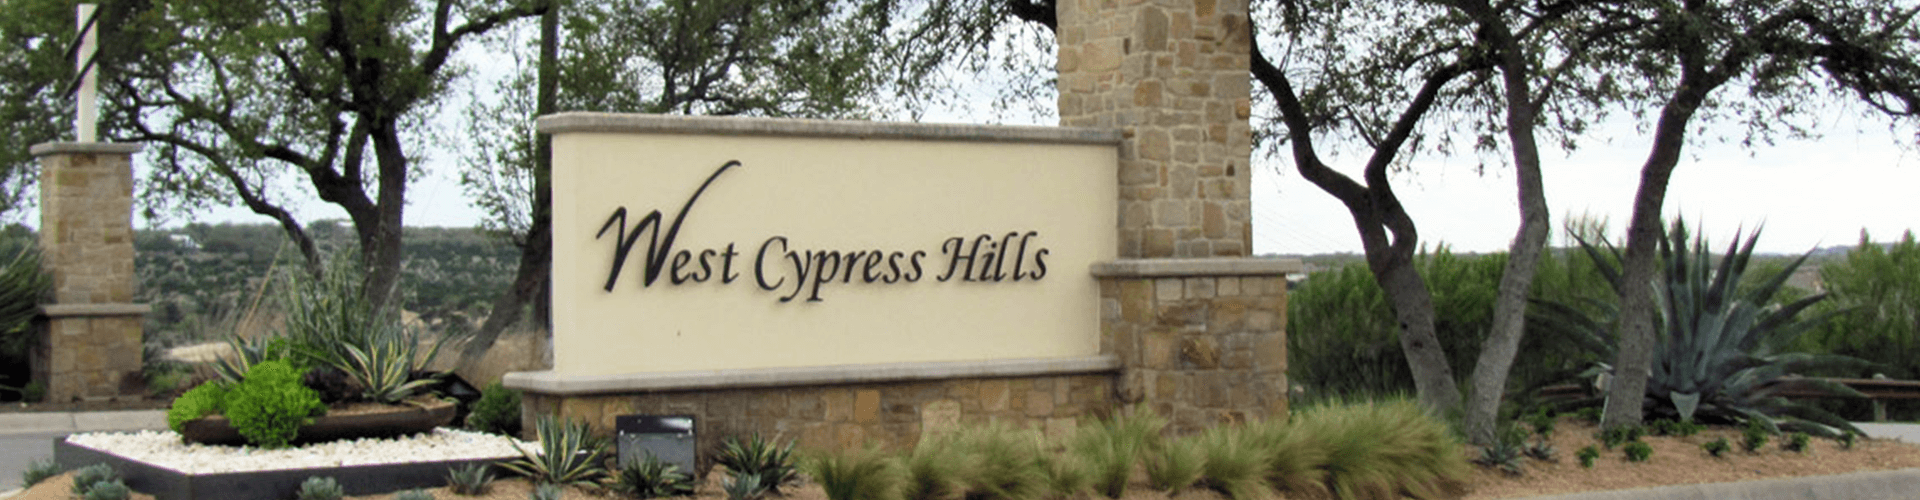 New Homes in West Cypress Hills Home Builder in Spicewood TX